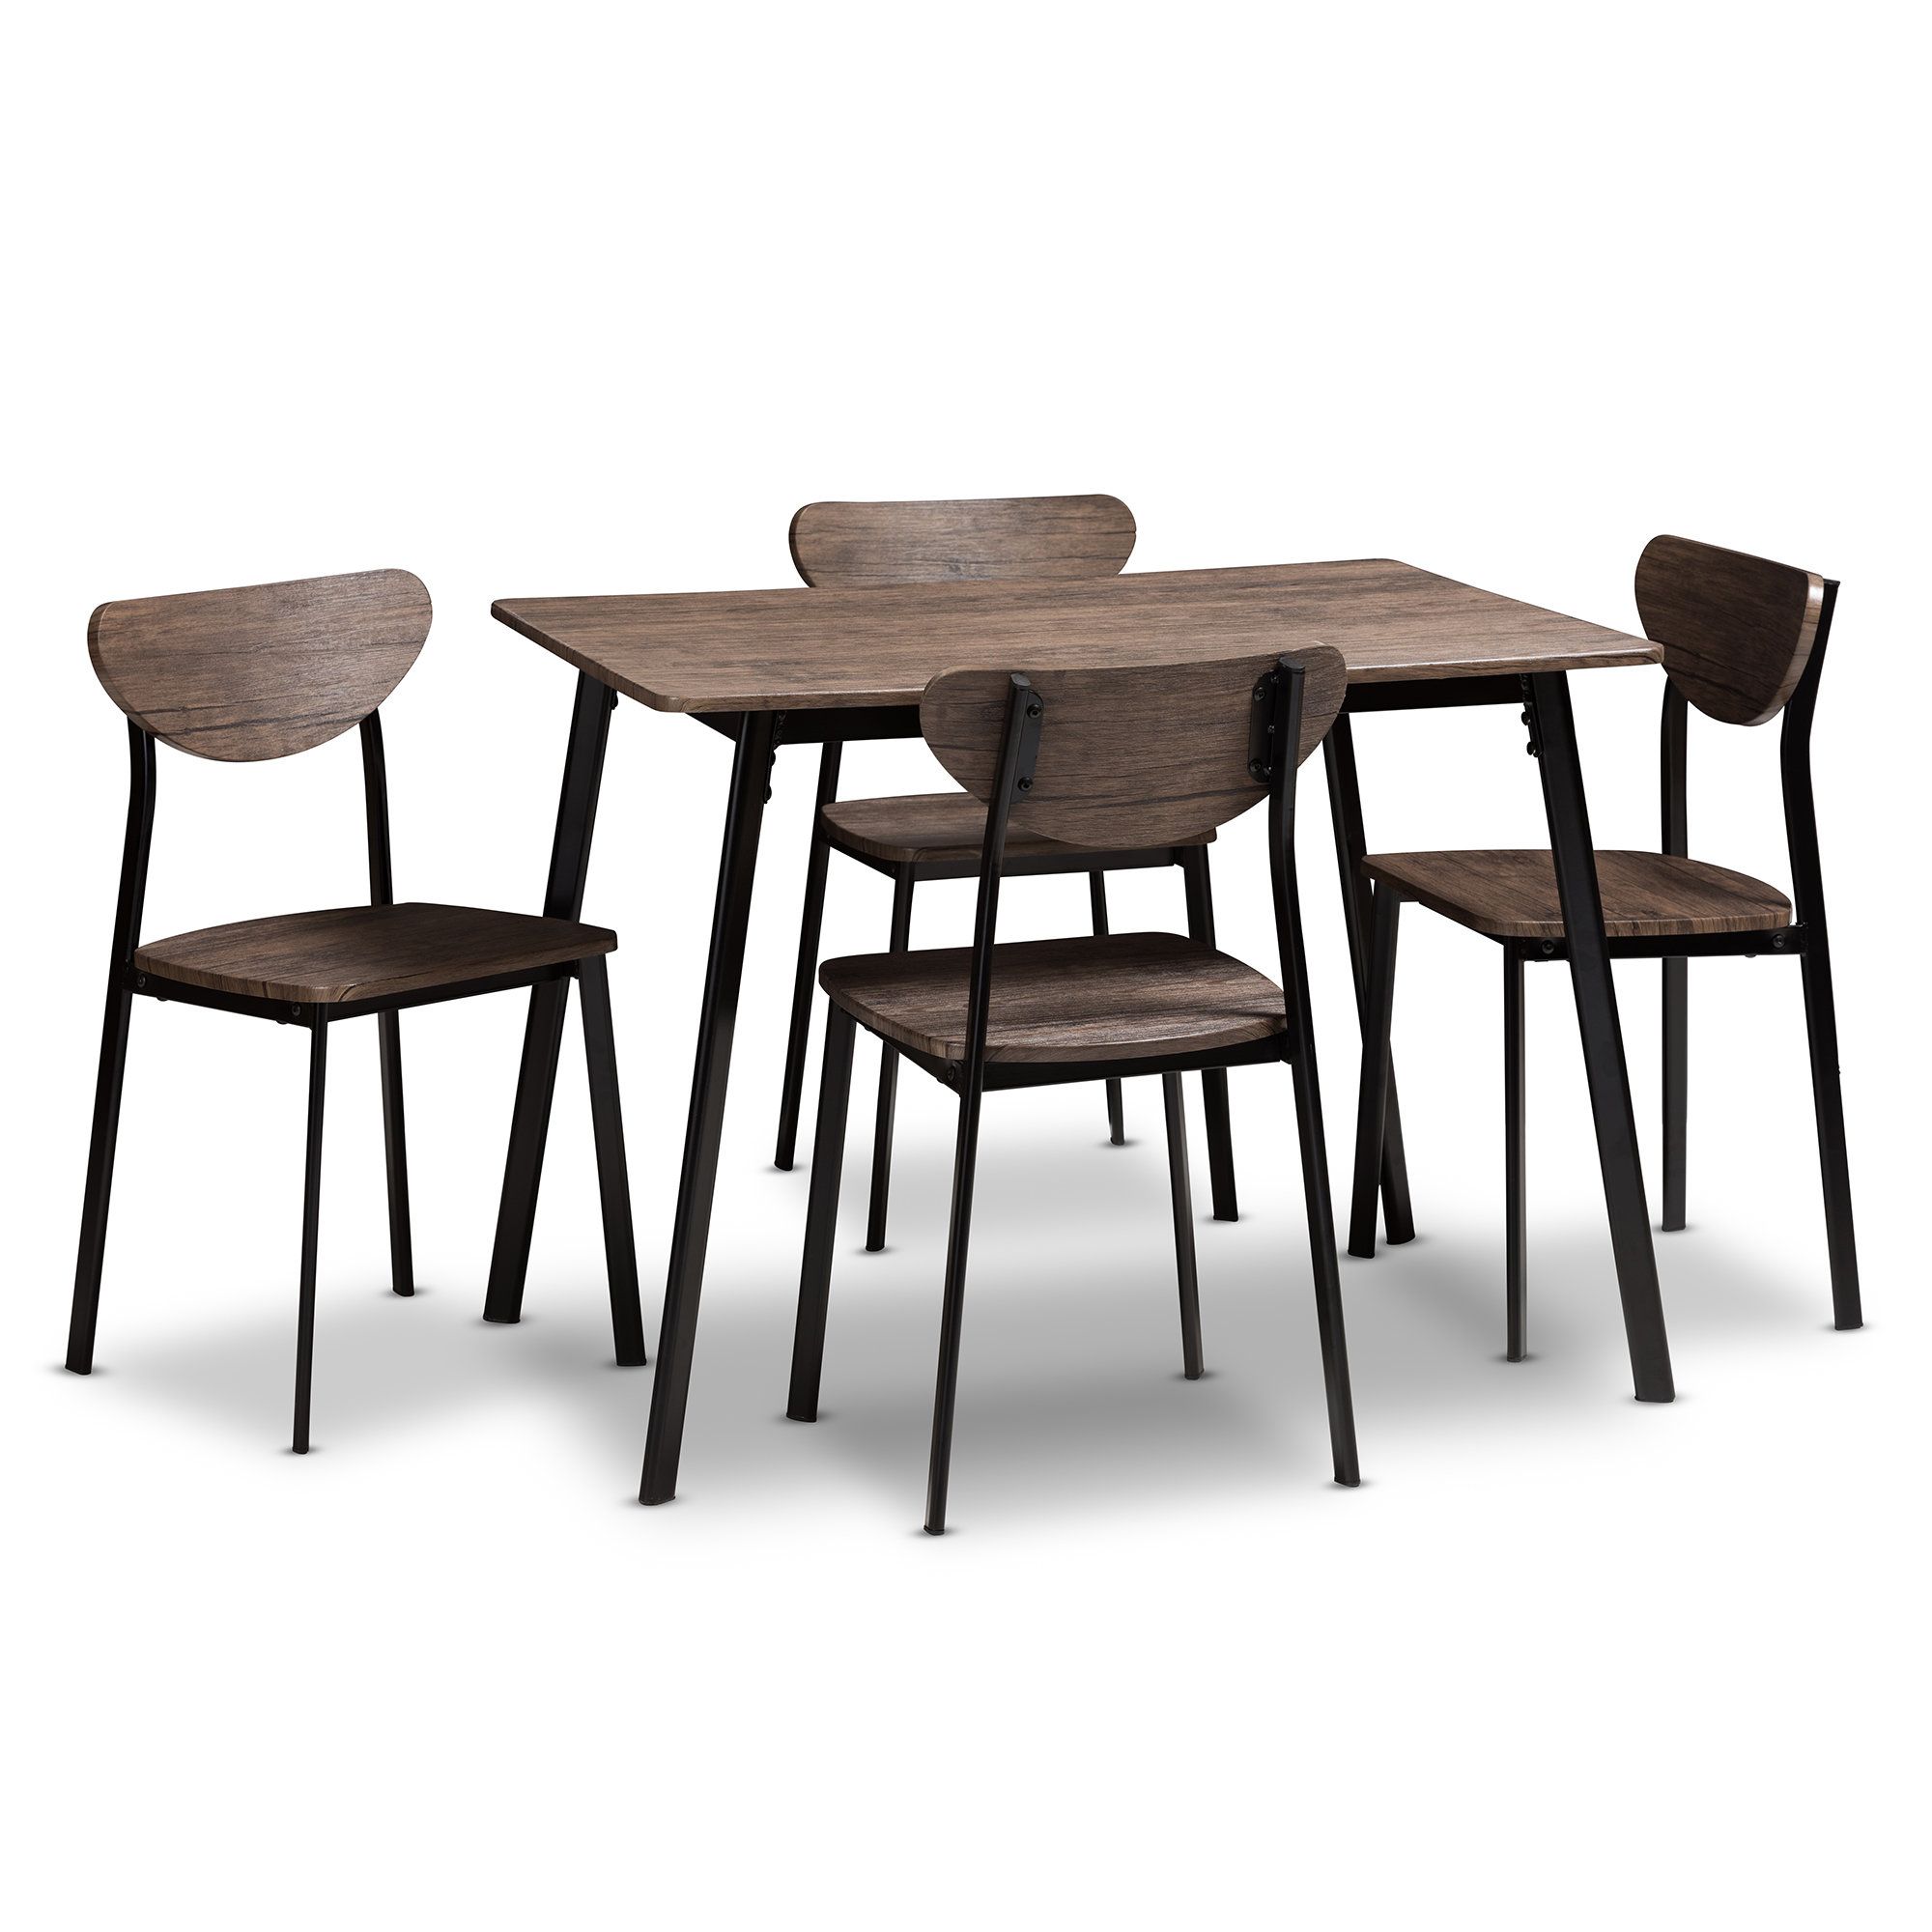 Joss & Main Pertaining To Recent Wiggs 5 Piece Dining Sets (View 6 of 25)